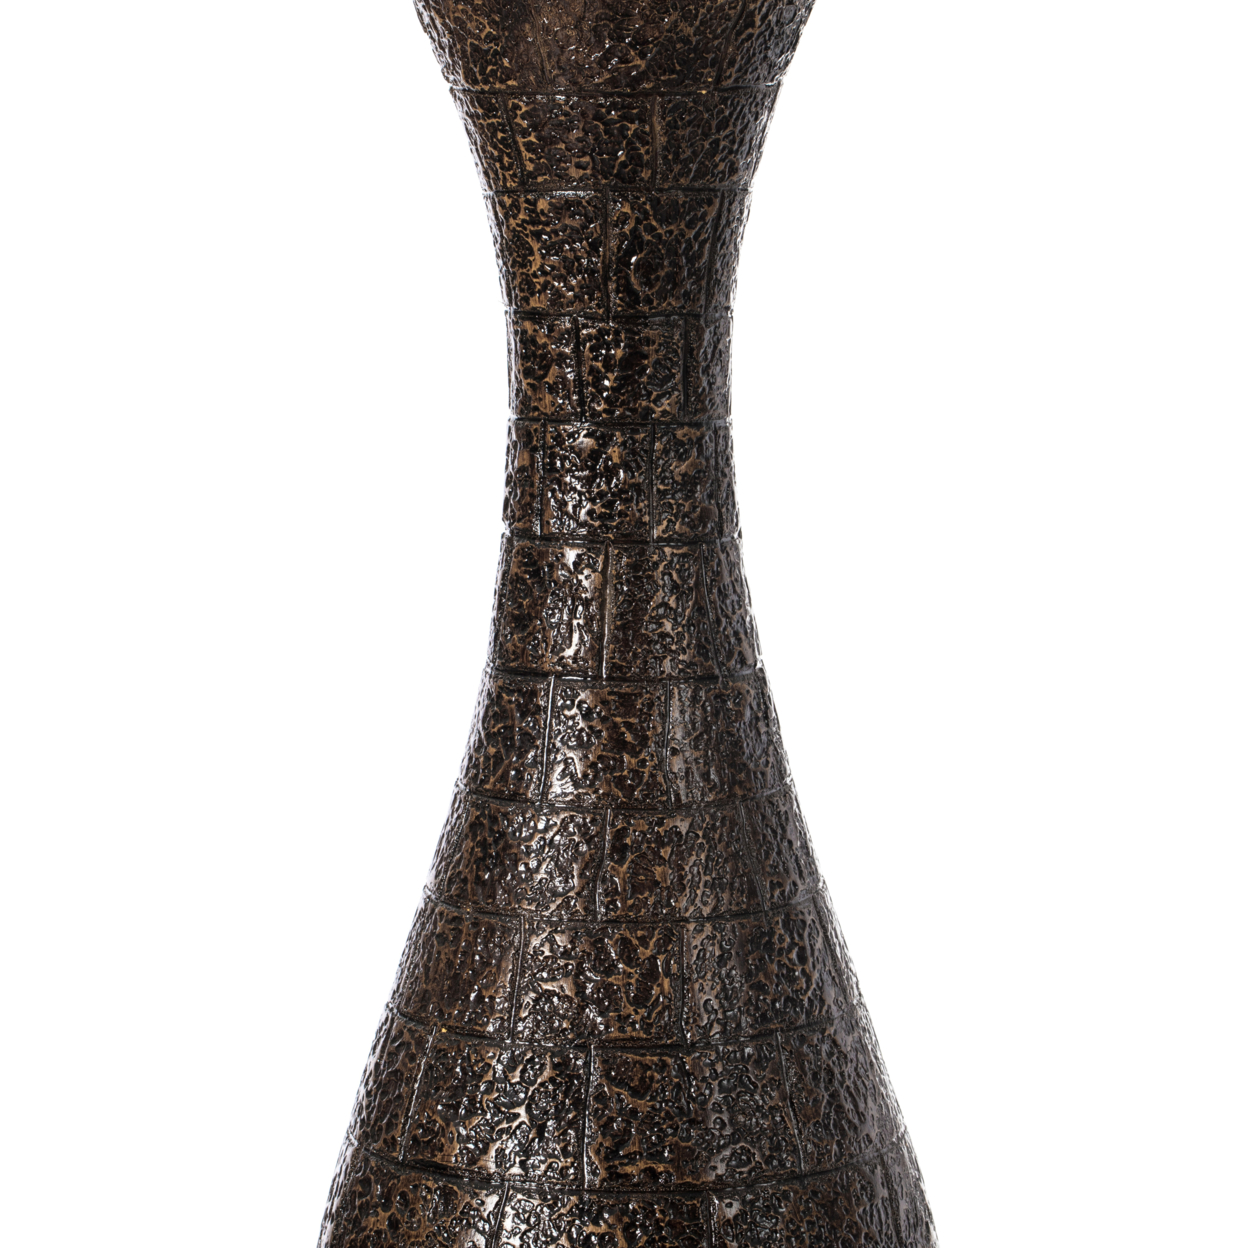 Uniquewise Modern Decorative Brown Textured Design Floor Flower Vase, for Living Room, Entryway or Dining Room, 31 inch